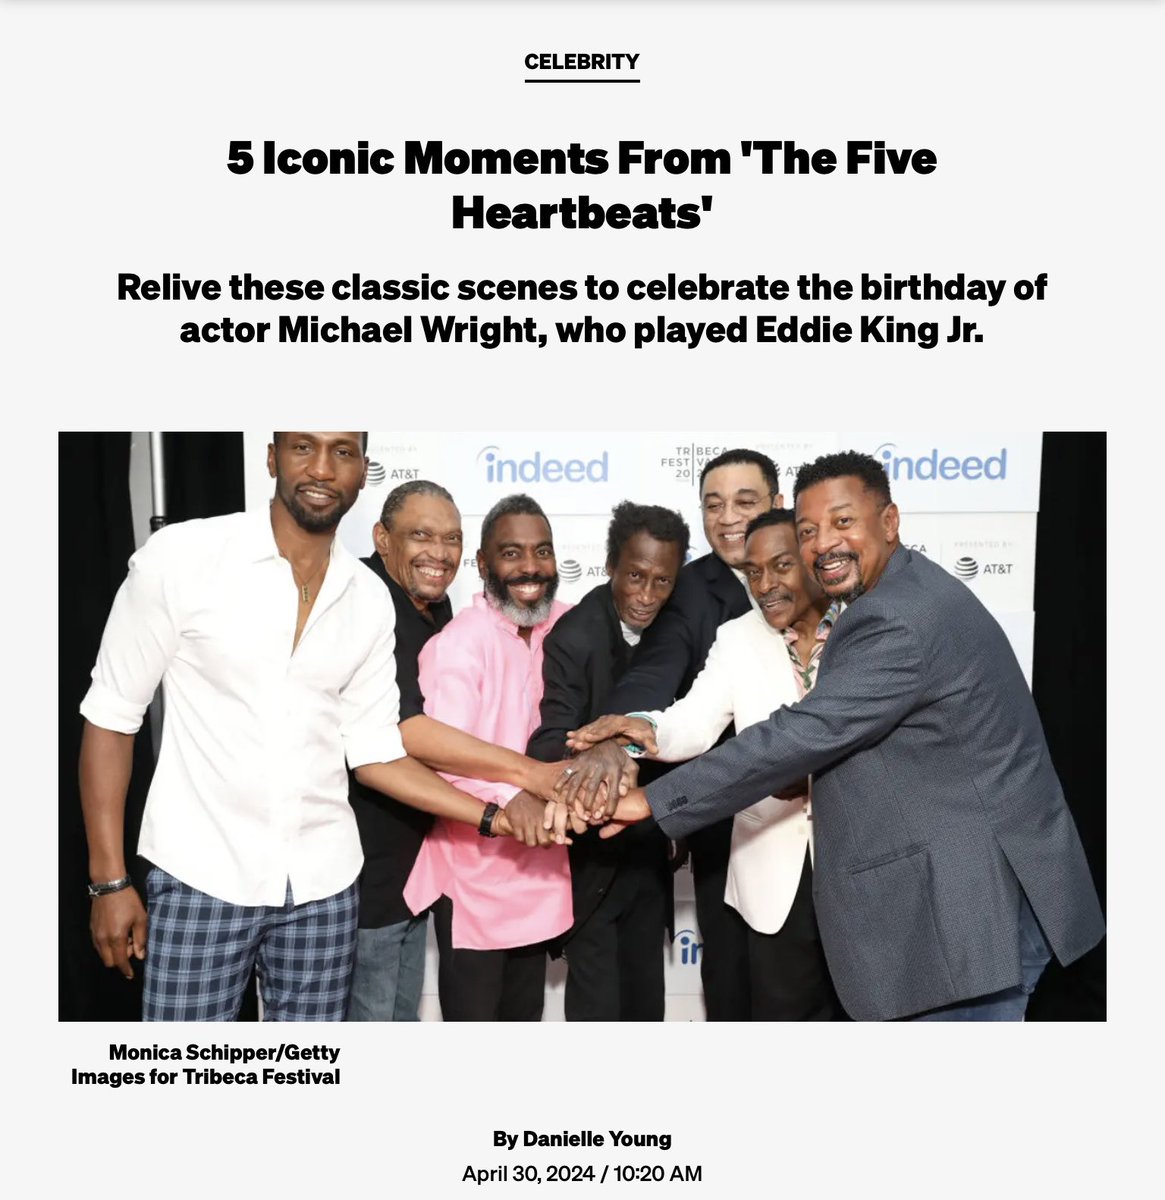 Happy Earth Strong 💪🏾 Day🎂🥂🎉 to our #fiveheartbeats brother Michael Wright aka “Eddie King Jr.” and to All my Five Heartbeats brothers , “Together Forever”‼️ @michaelwright684 @iamroberttownsend @harrylennix @flash5heartbeats #ticowells @hawthorne2995 #leon